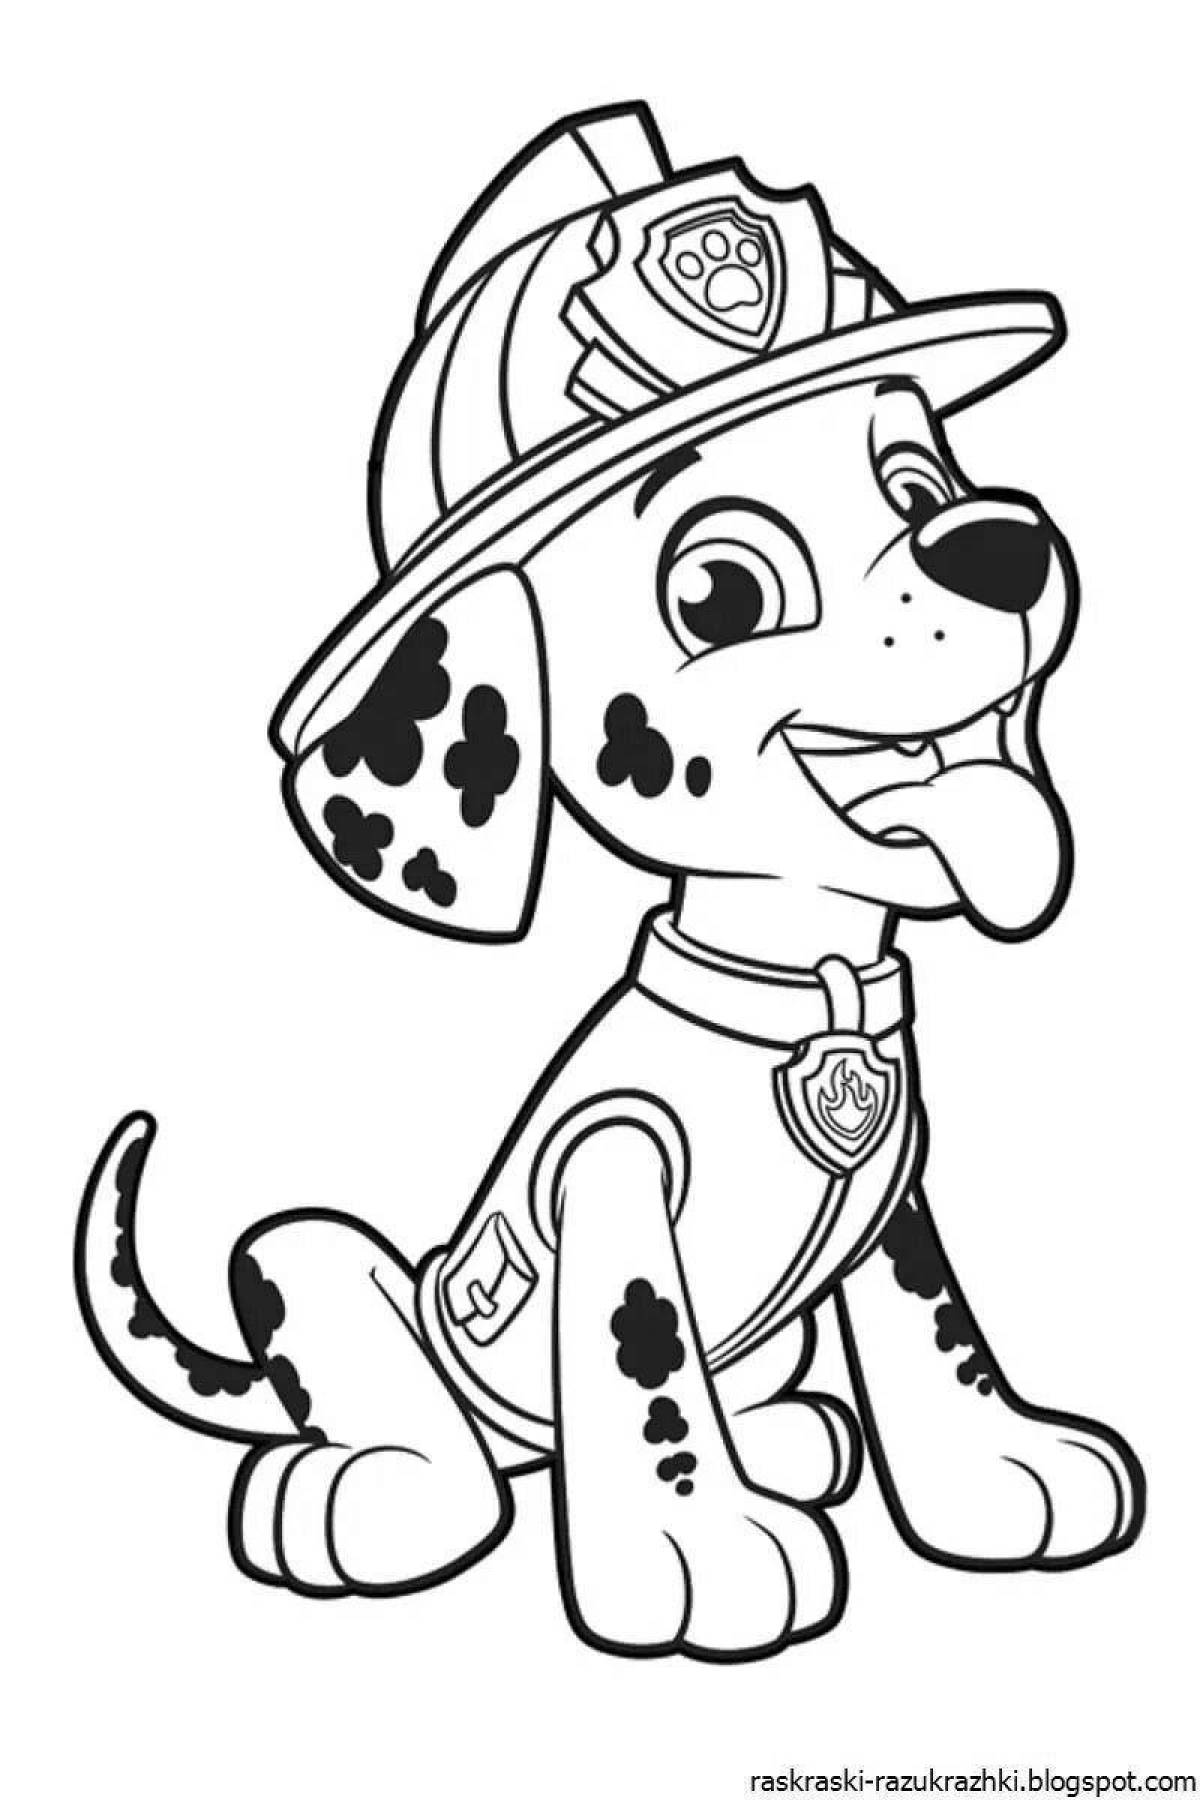 Adorable Paw Patrol Coloring Page for Toddlers